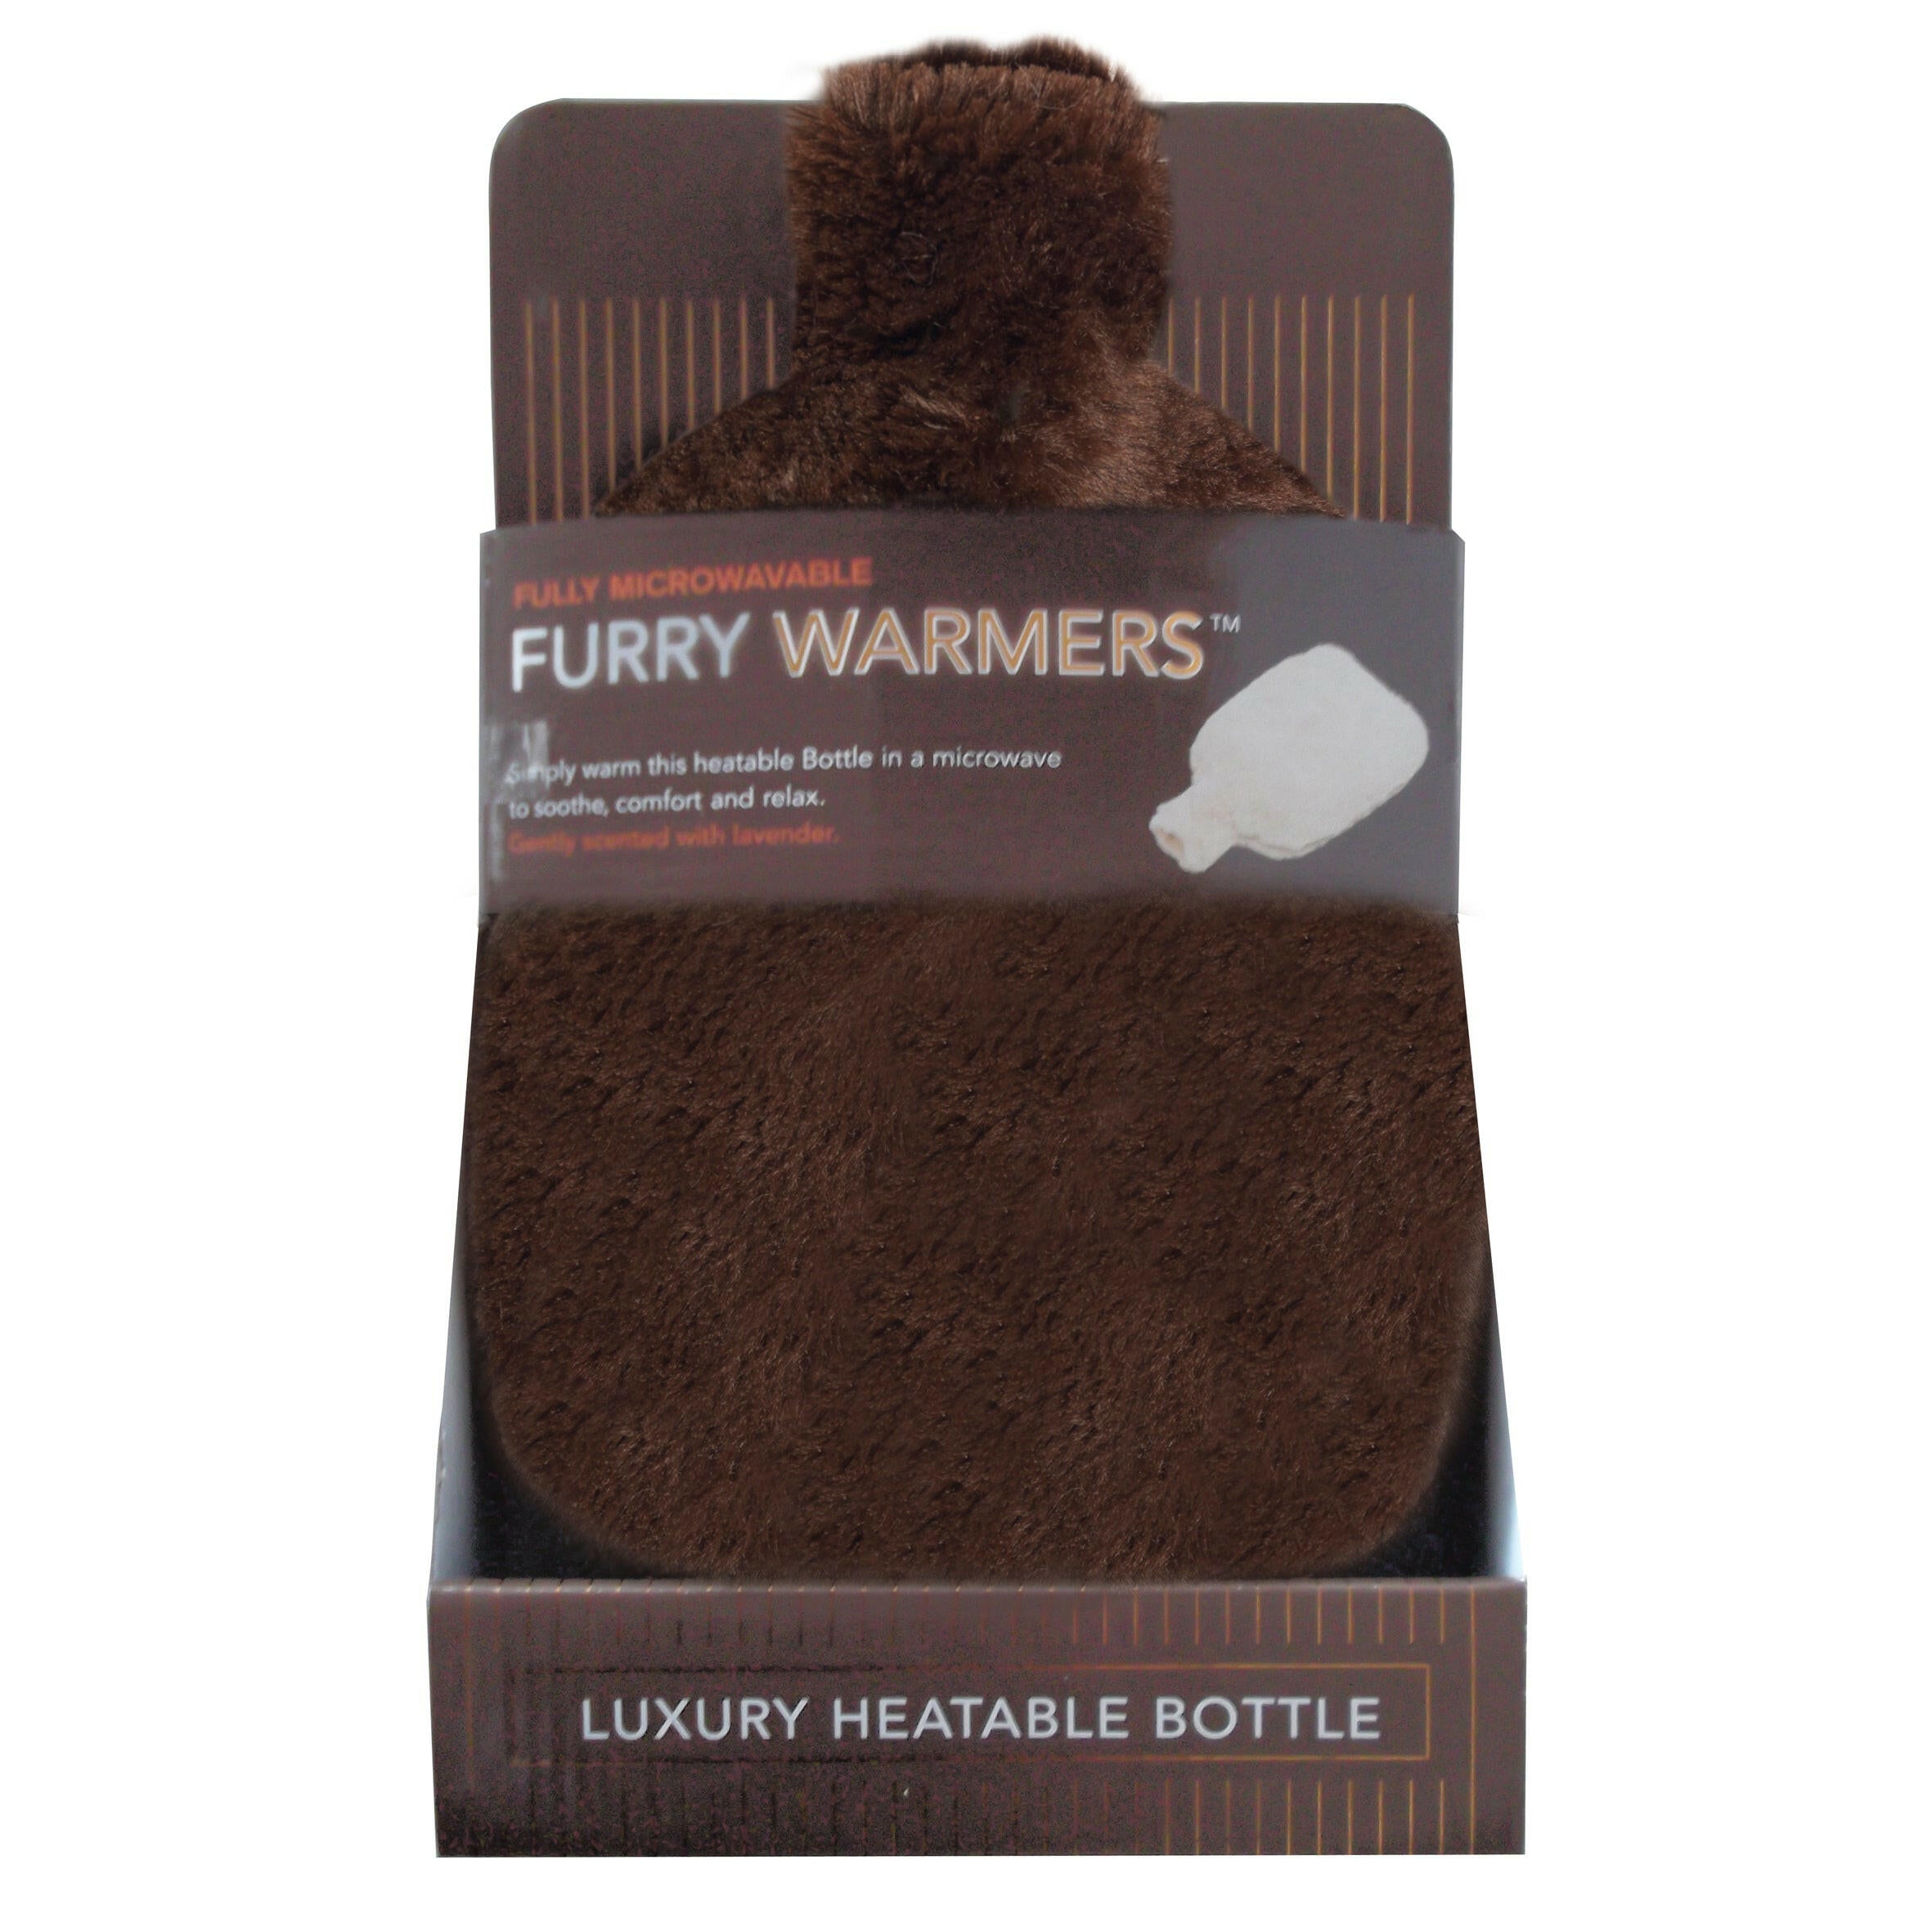 Furry Warmers Fully Microwavable Furry Bottle